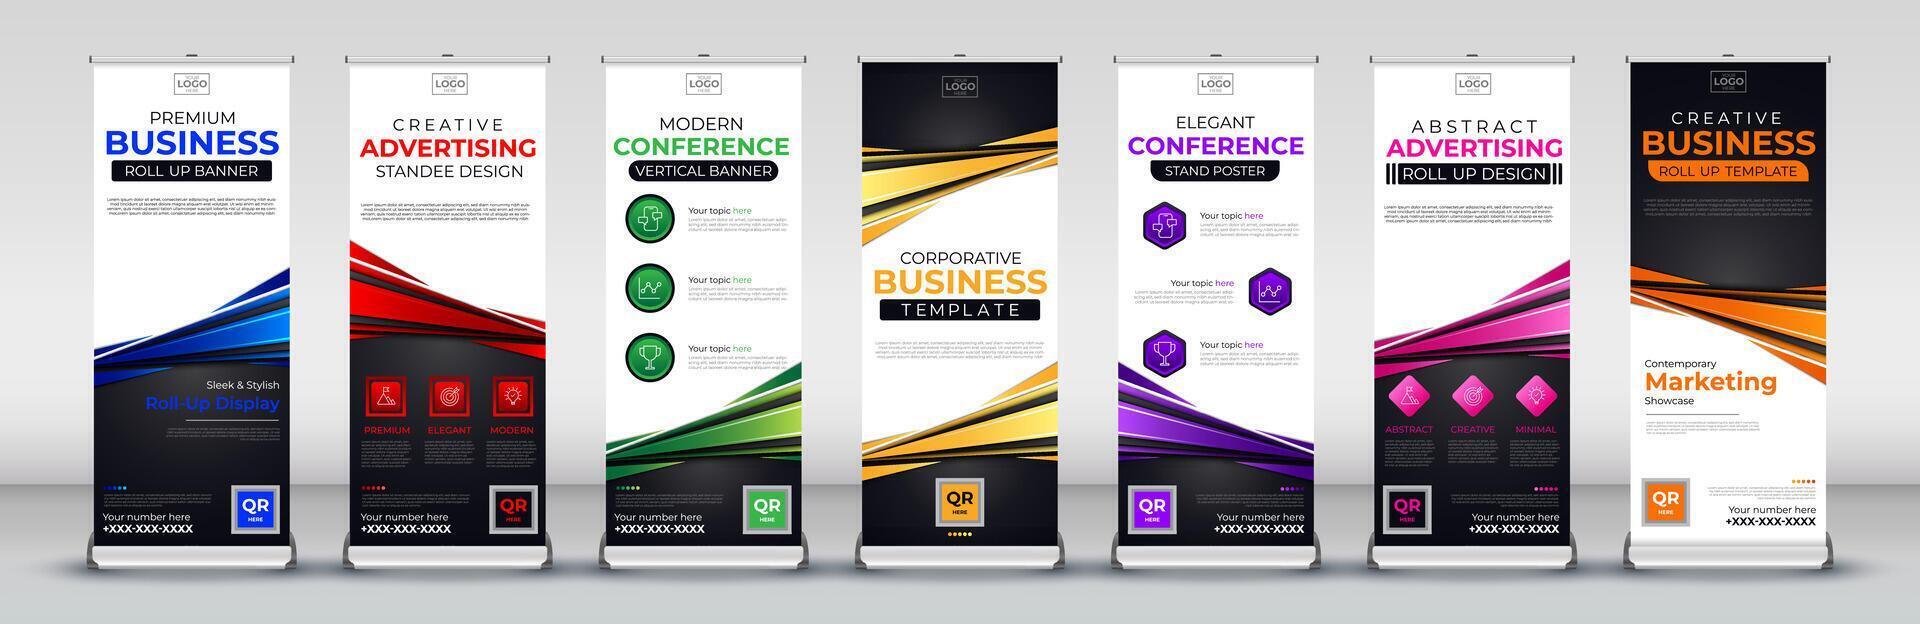 Business abstract roll up banner design in blue, red, green, yellow, purple, pink and orange colors vector